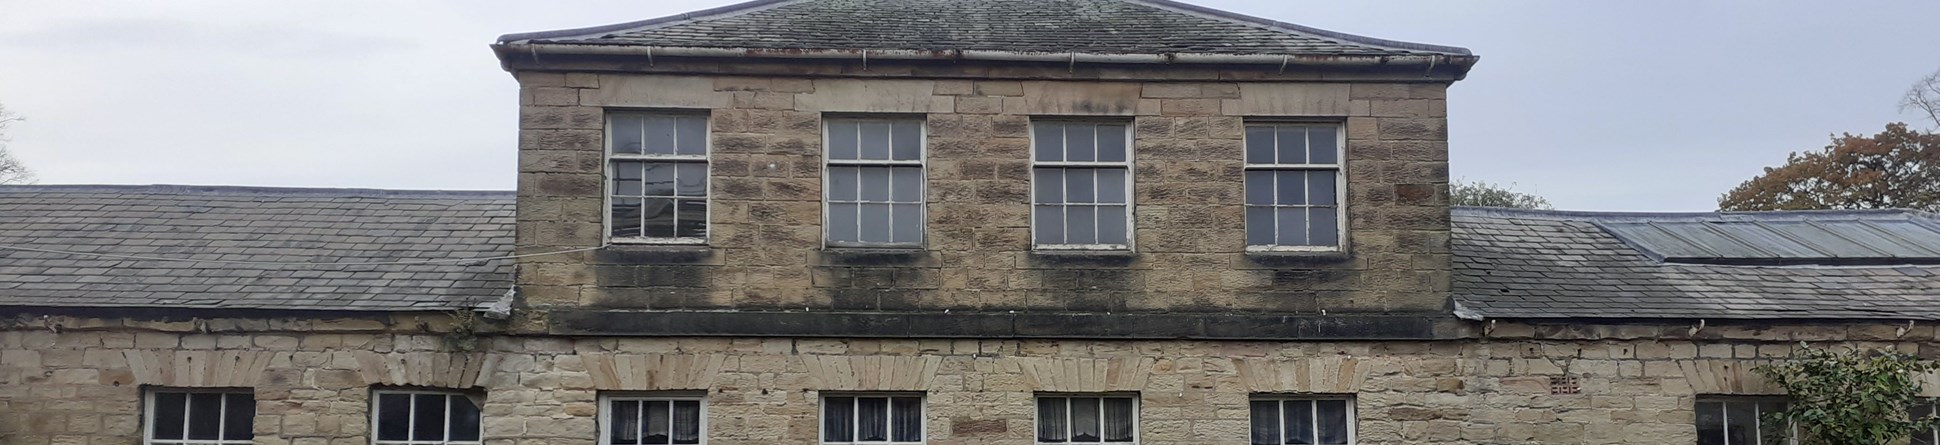 An old two storey stone building.